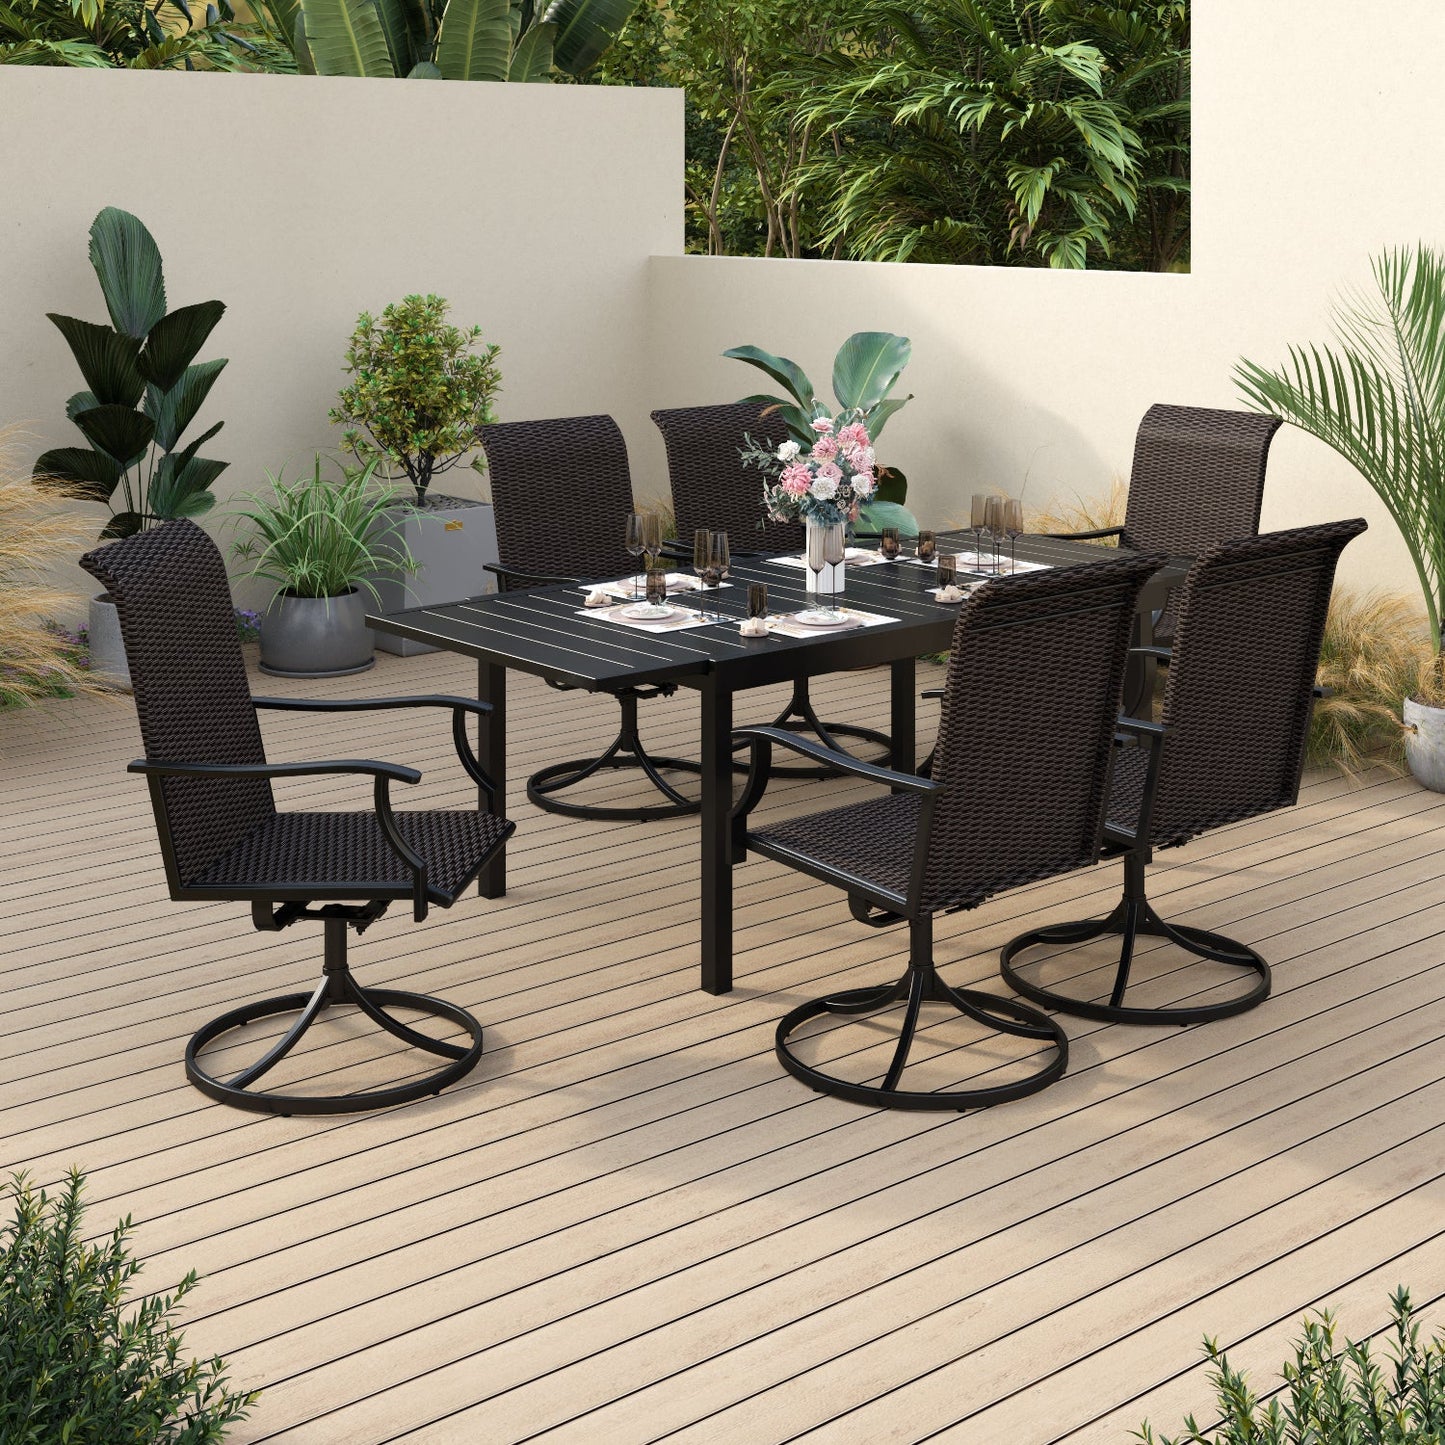 Sophia & William 7 Pieces Outdoor Patio Dining Set High Back Swivel Dining Chairs and Metal Dining Table with Umbrella Hole